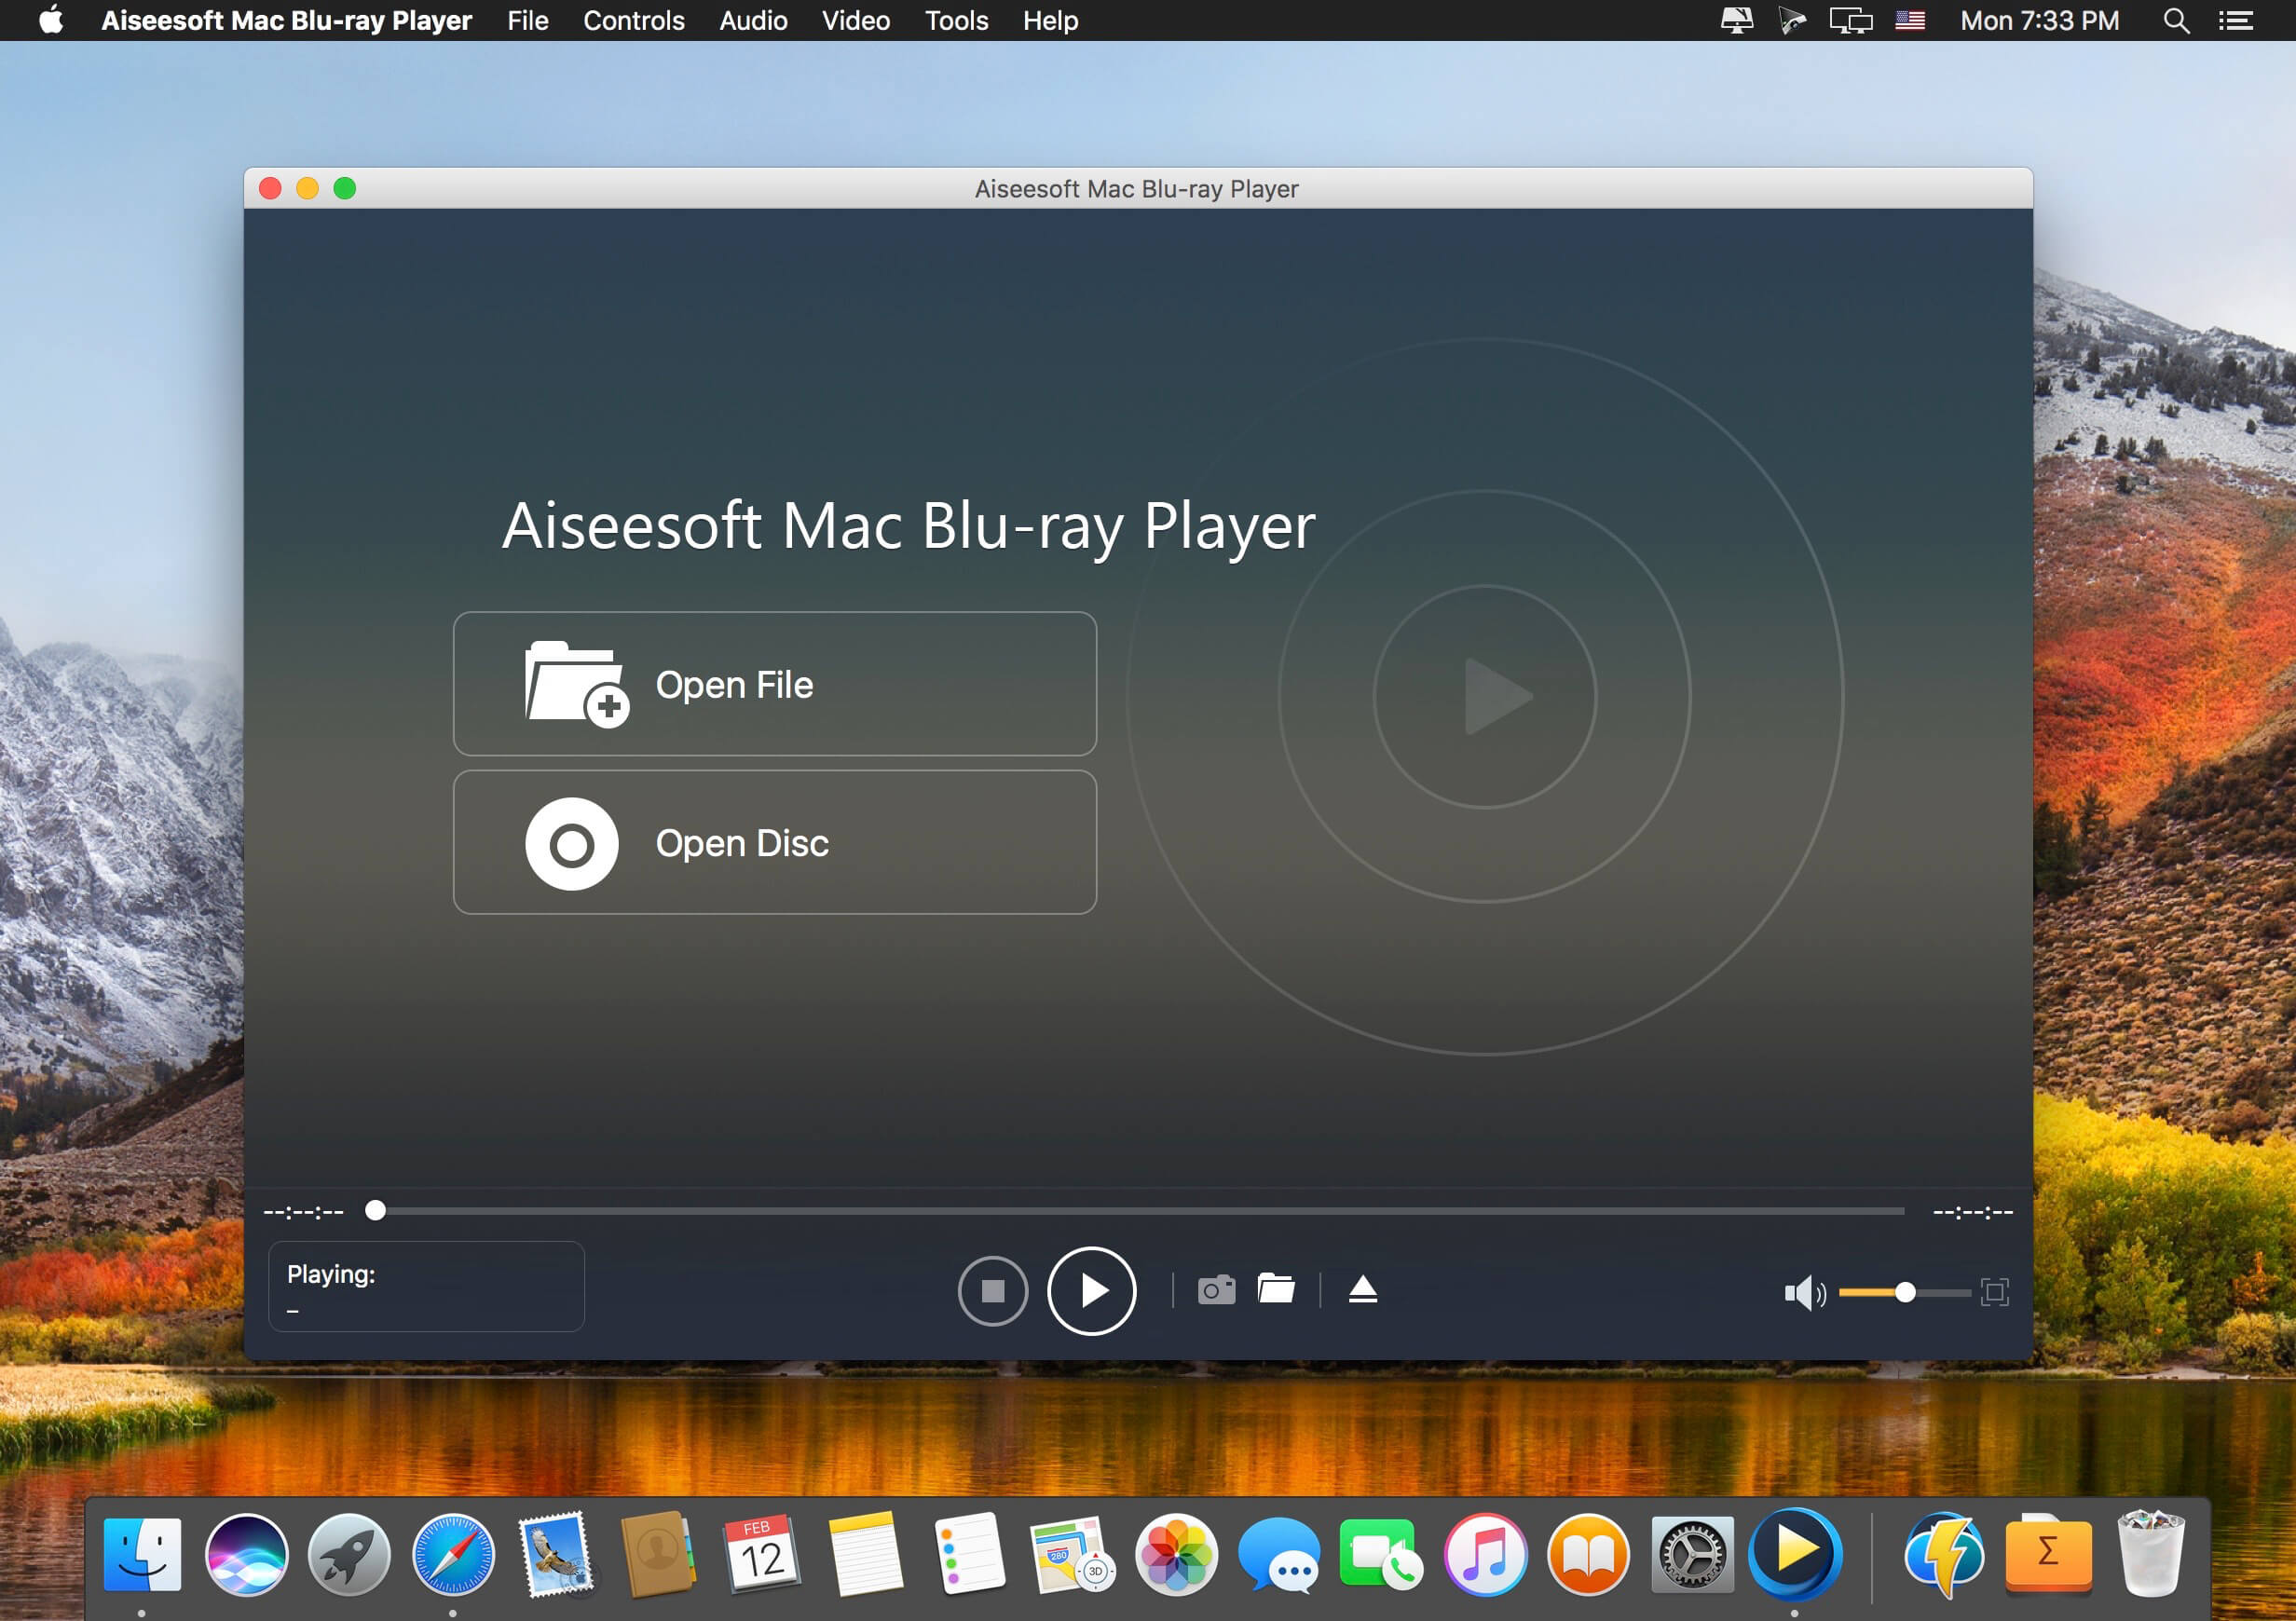 Aiseesoft Blu-ray Player 6.7.60 instal the new